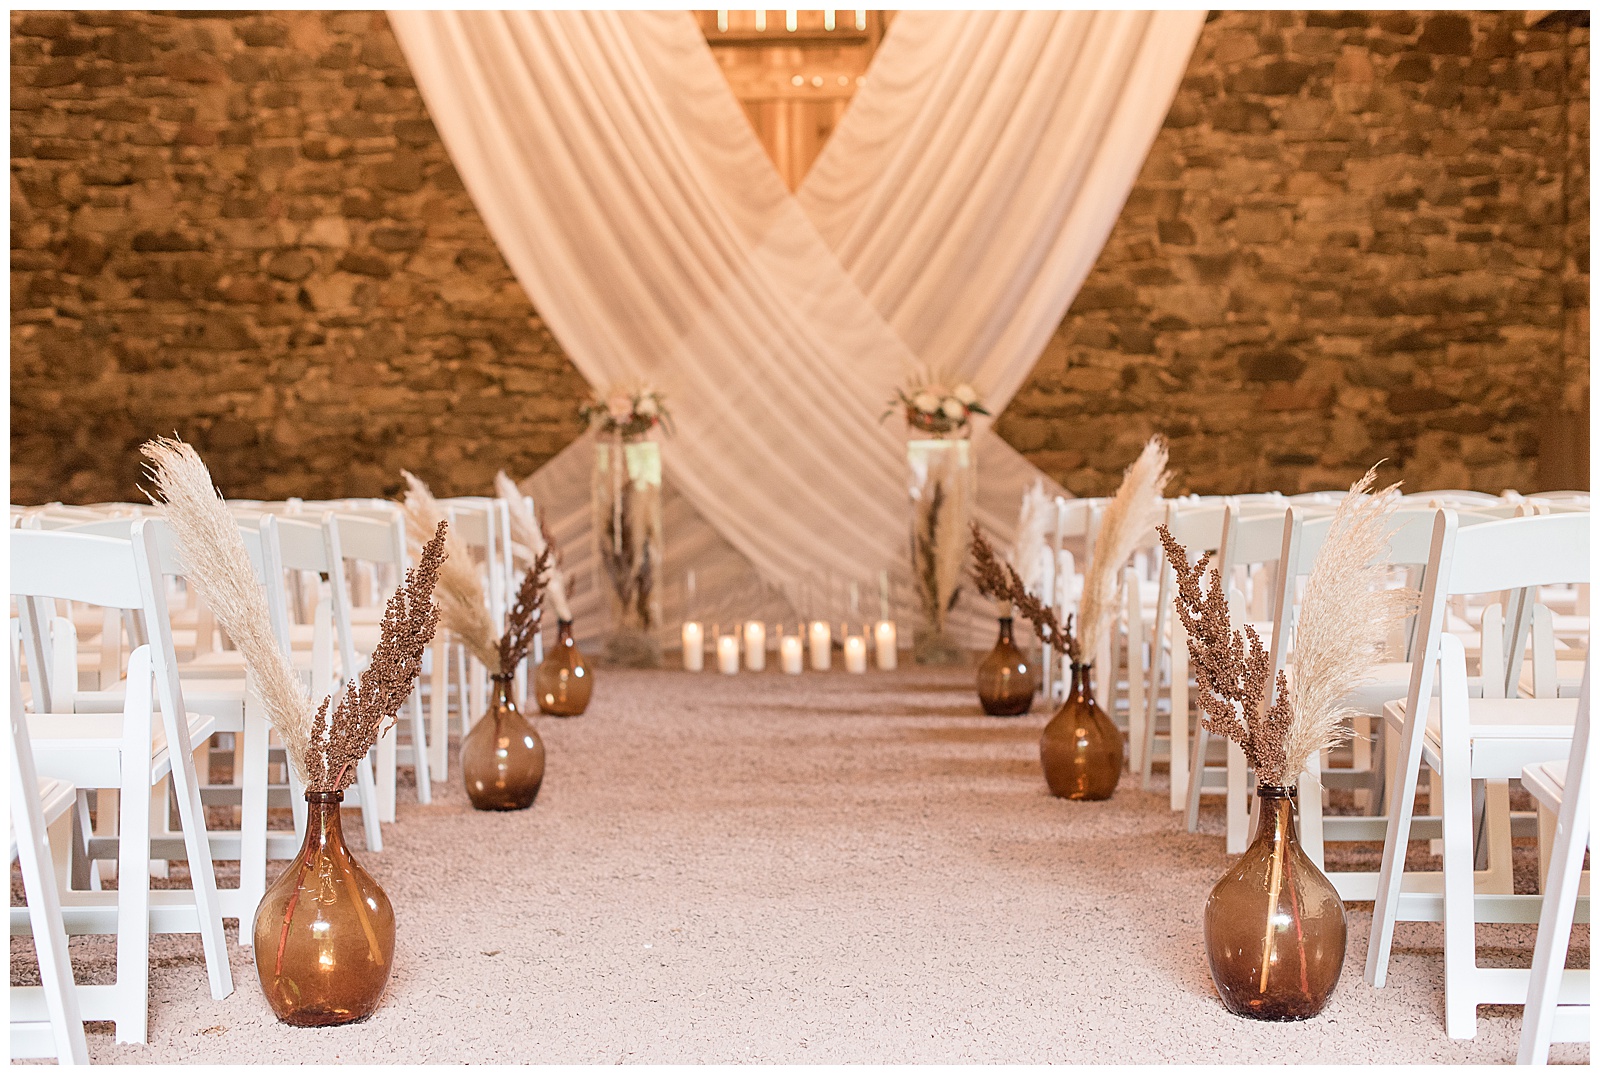 beautifully decorated stone barn wedding ceremony with rows of white chairs and white curtains on display at elizabeth furnace